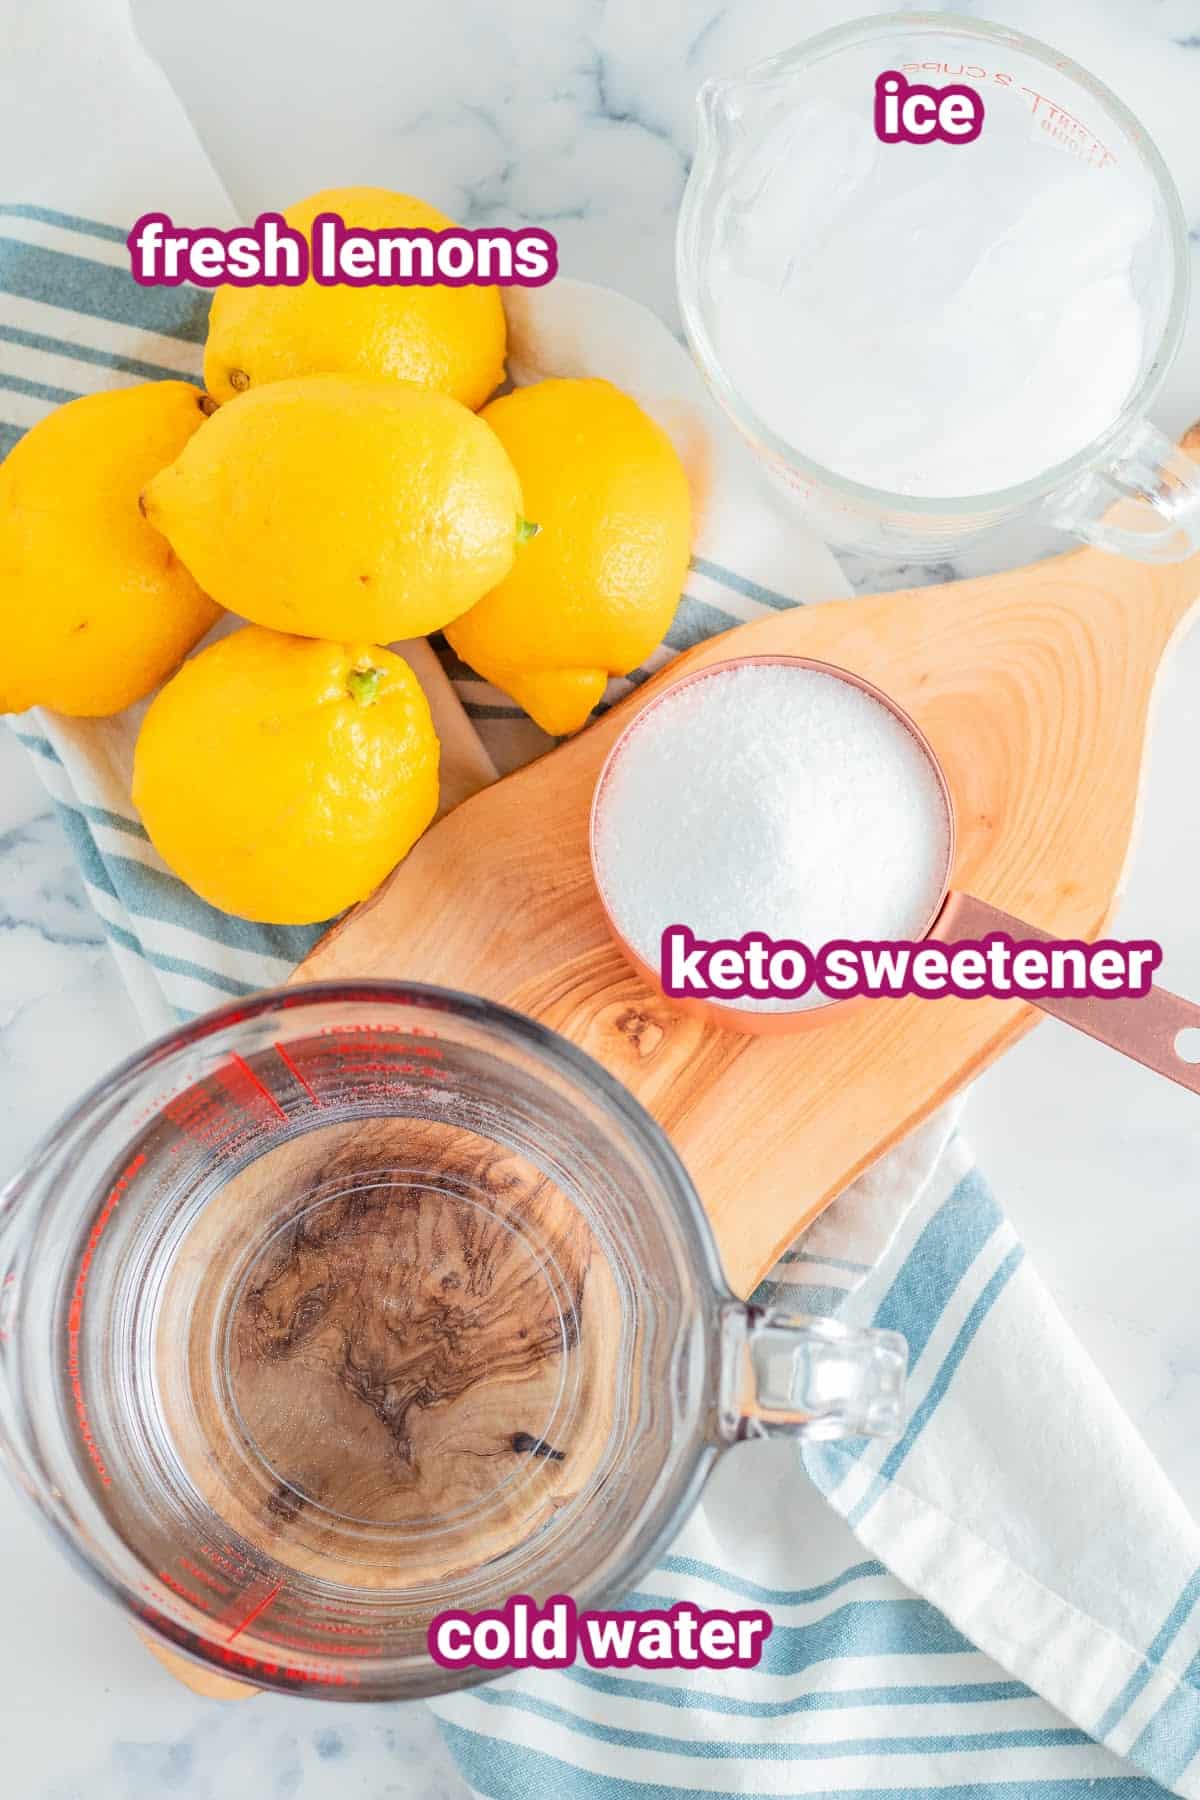 sugar-free lemonade ingredients on a counter with text to label the fresh lemons, ice, cold water, and keto sweetener